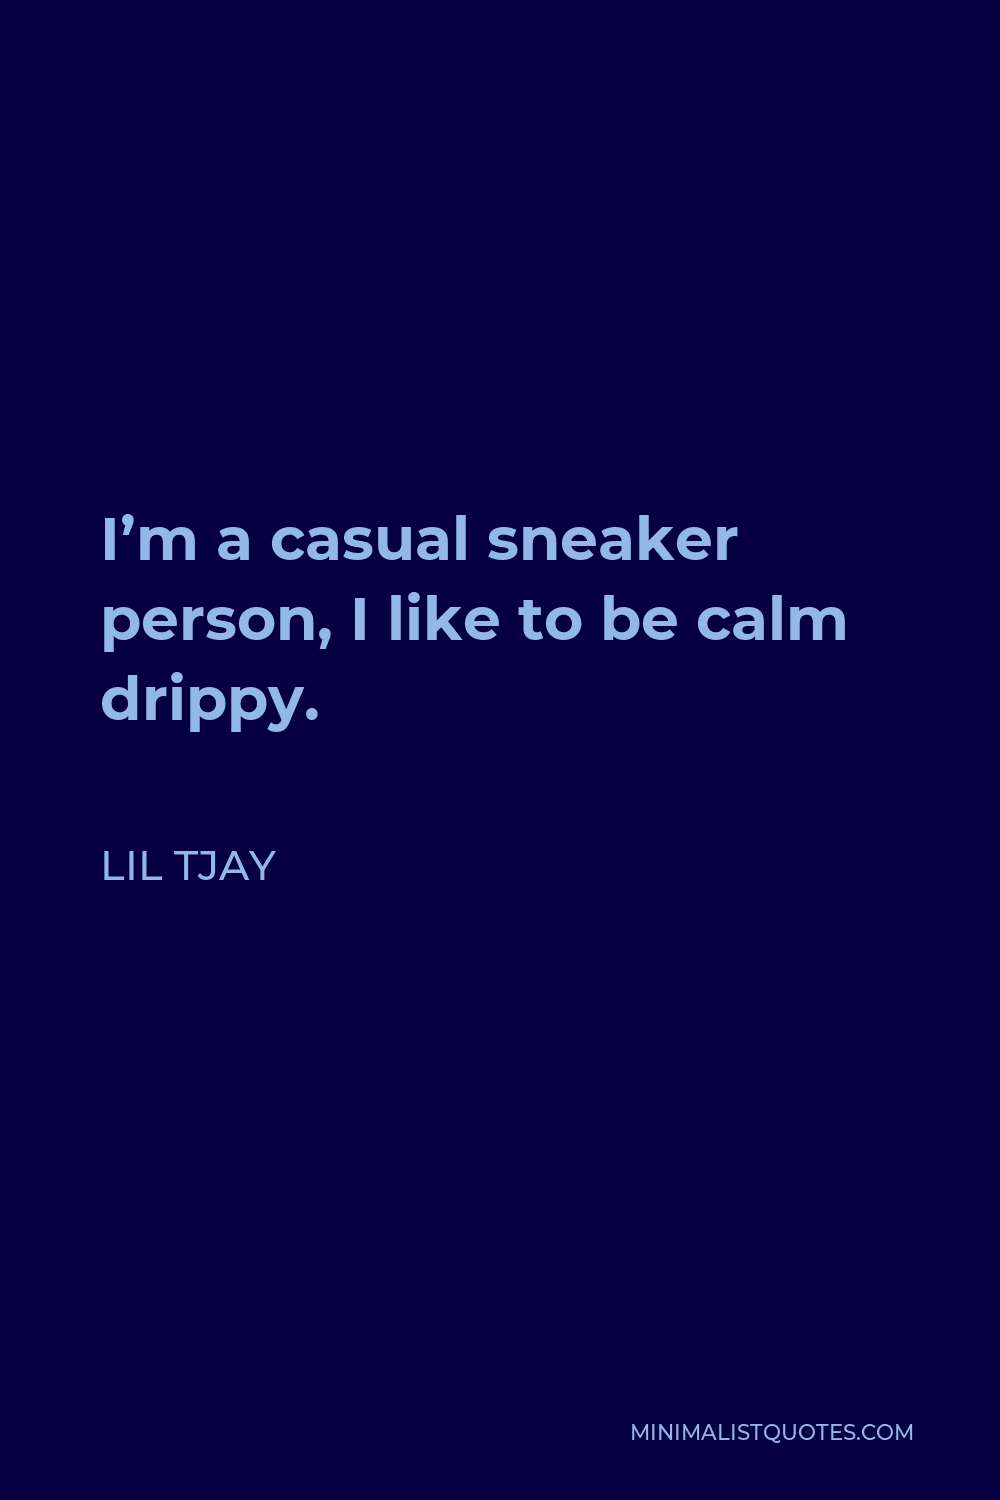 Lil Tjay Quote - I’m a casual sneaker person, I like to be calm drippy.